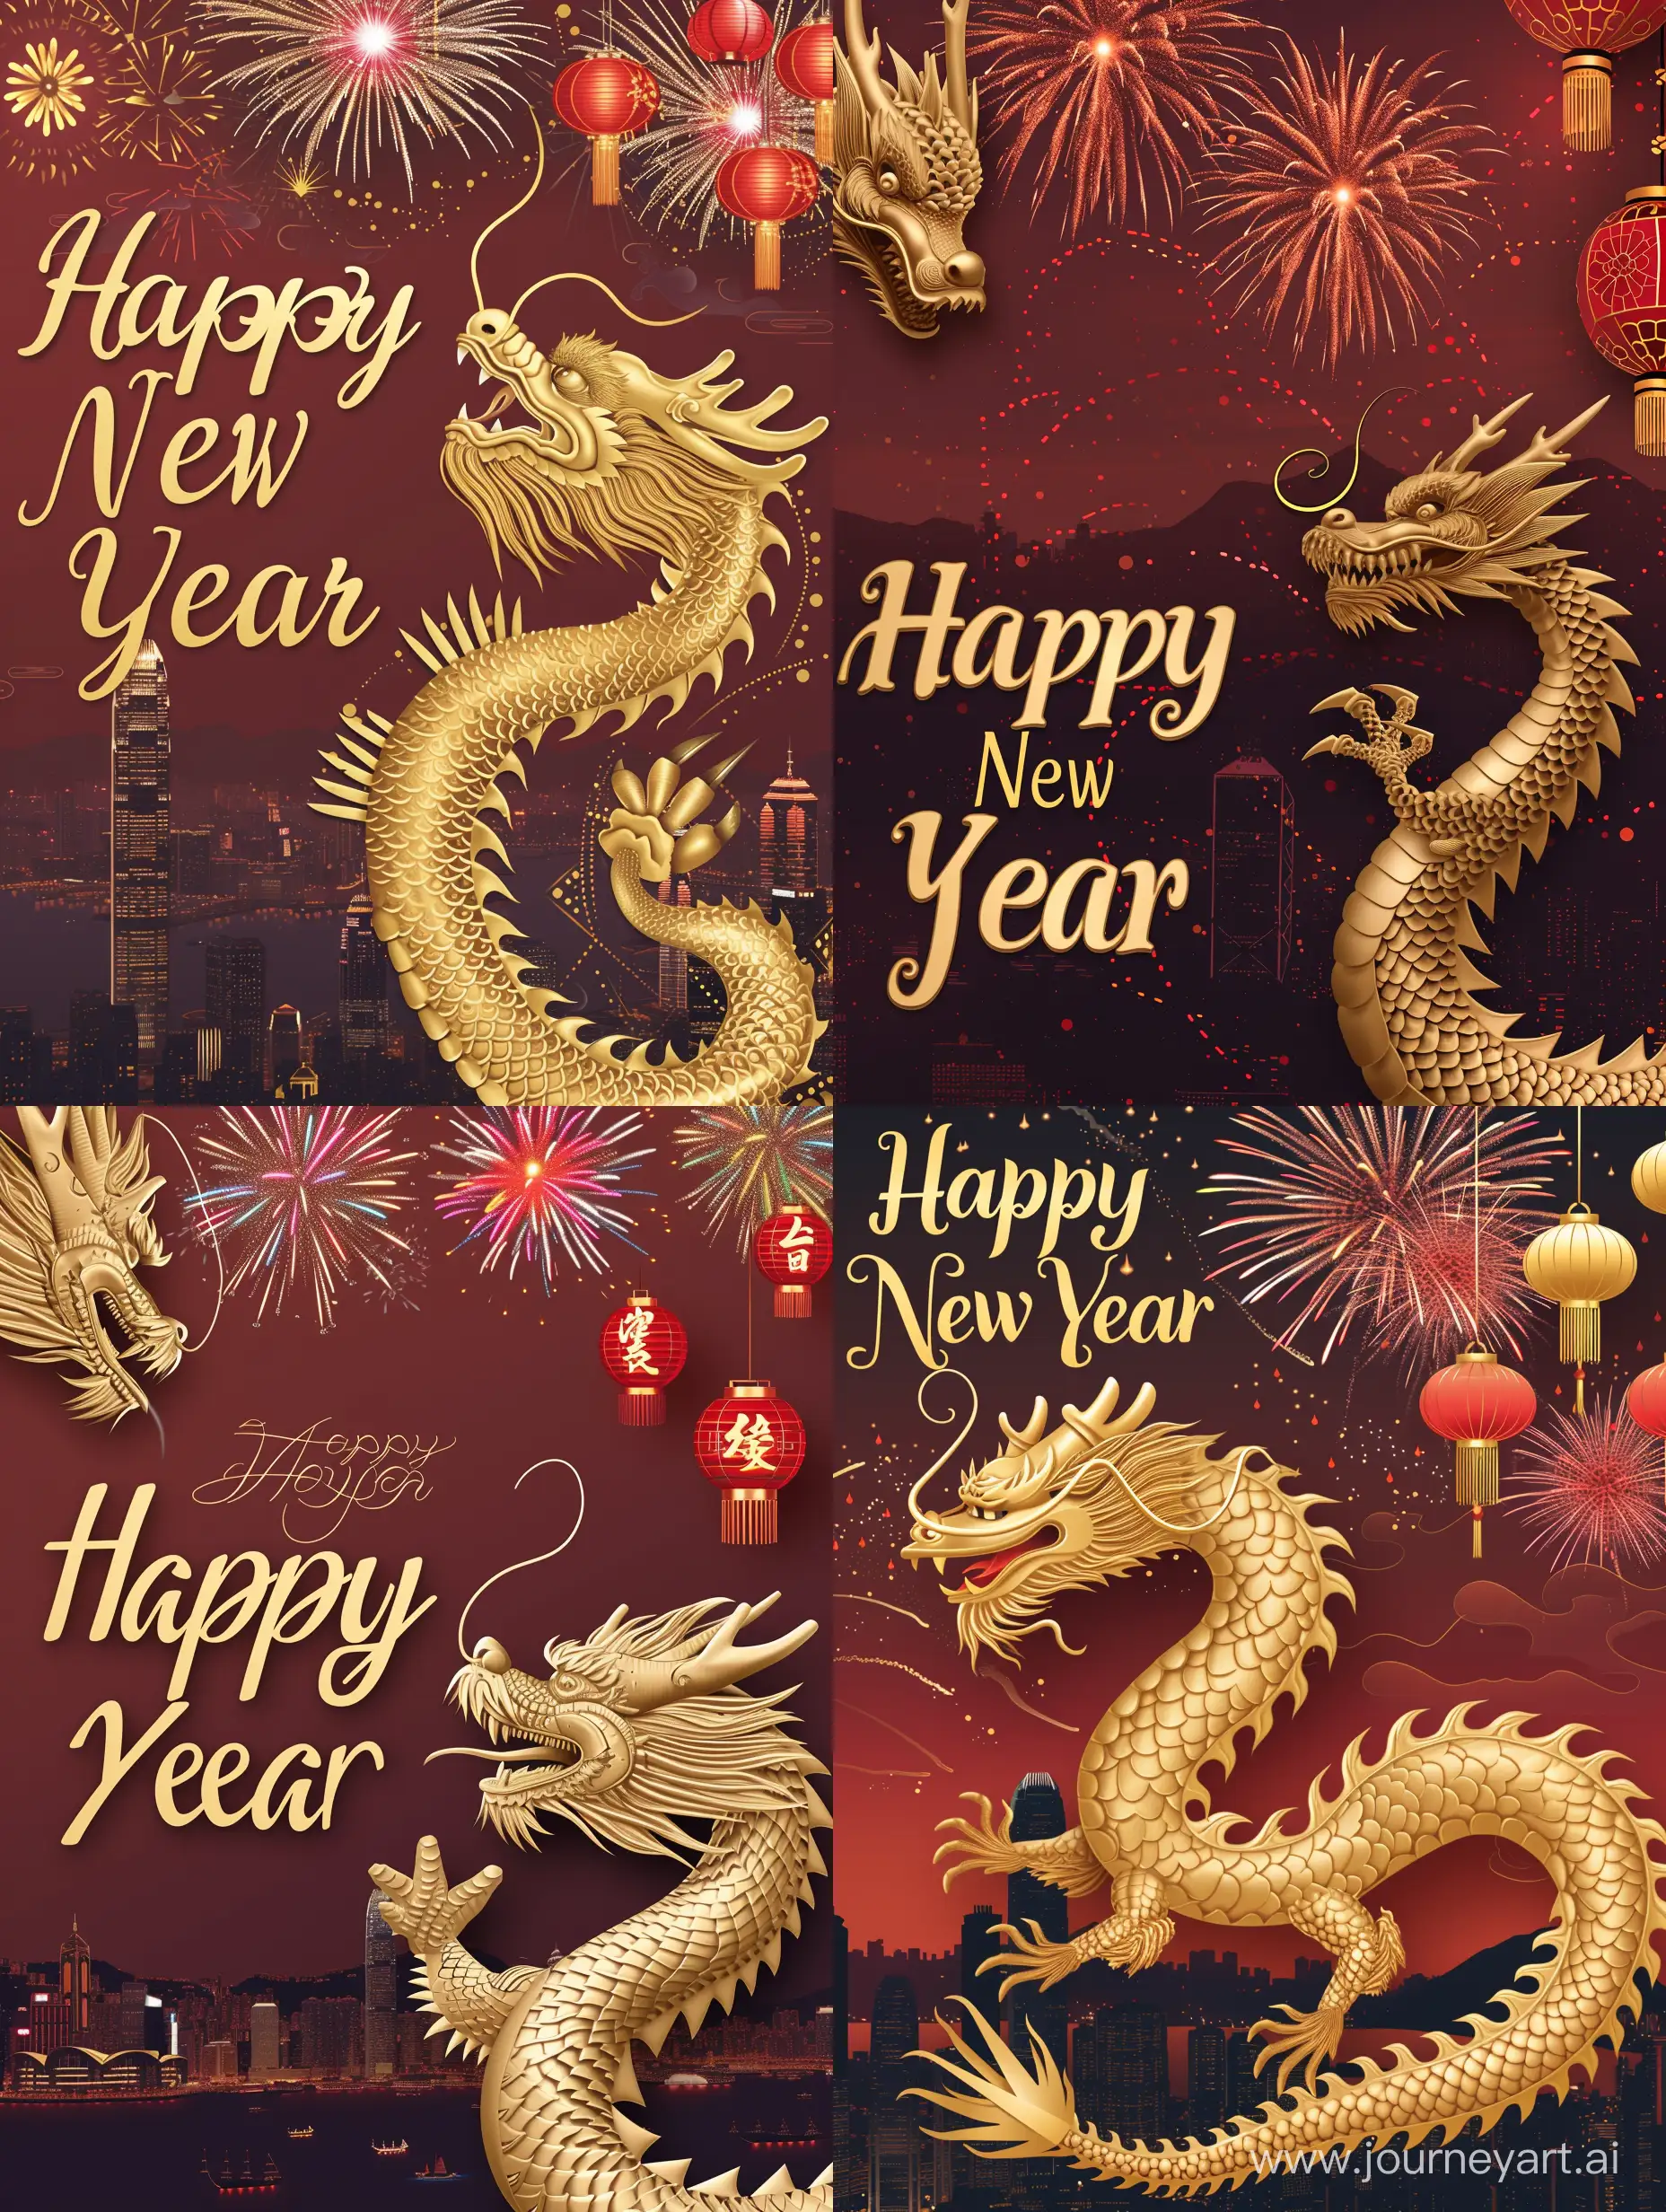 a golden dragon, with claws, side view, 3D style with details lighting, located across the screen, head on left top and tail on right button; background is Hong Kong city view silhouette in dark red color across the lower half of screen; colourful fireworks on top, 3D style; 3 Chinese styled lanterns in red and gold located top right corner; text “Happy New Year ” with shadows, bold, calligraphy style, golden color, located on the left next to dragon head.